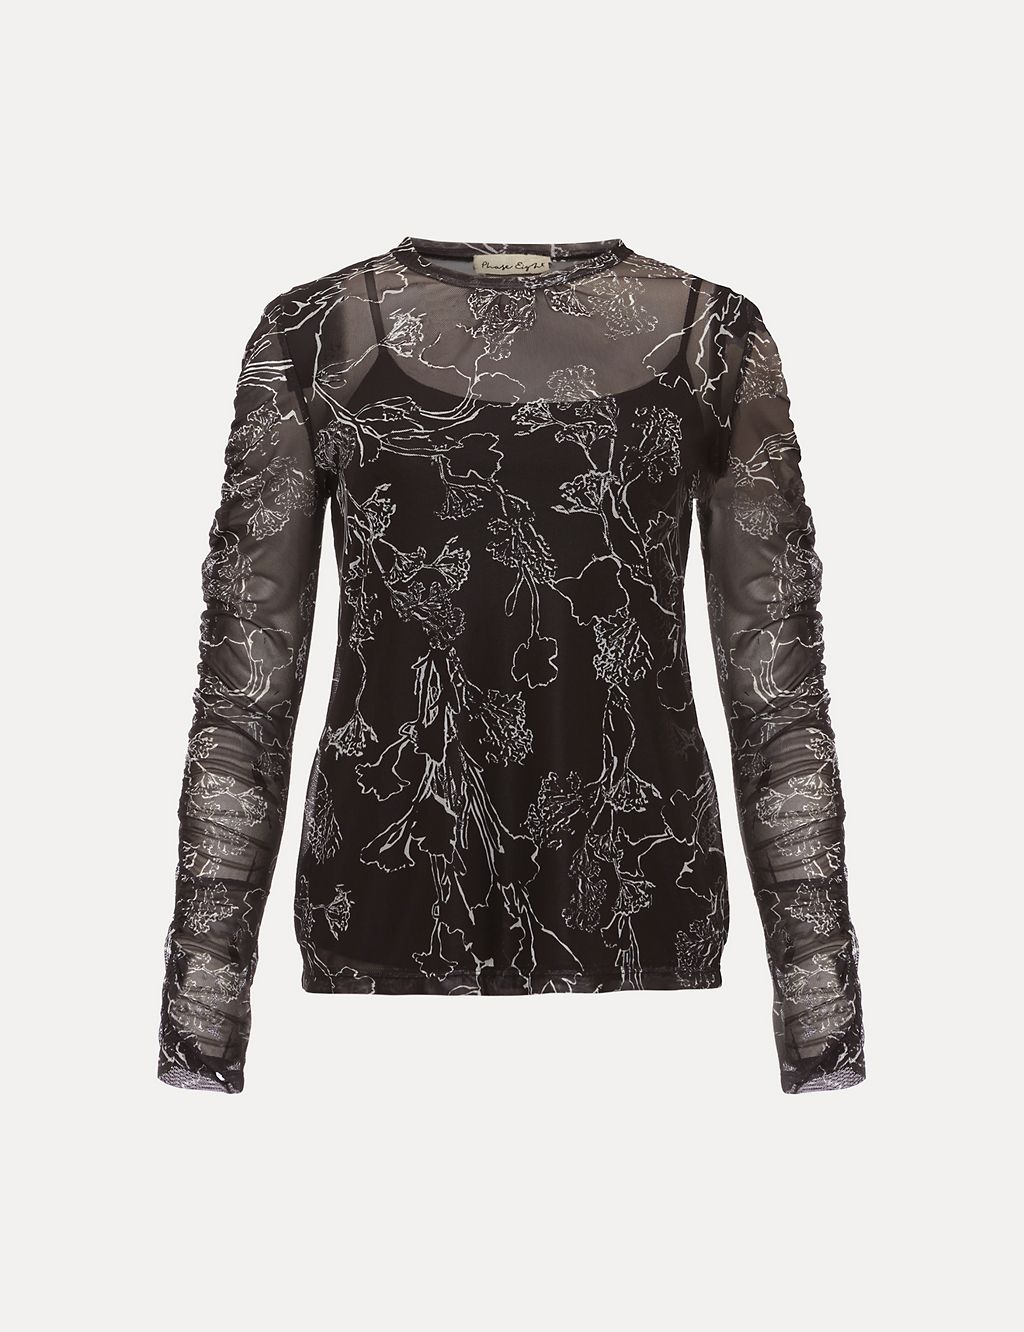 Mesh Floral Top | Phase Eight | M&S